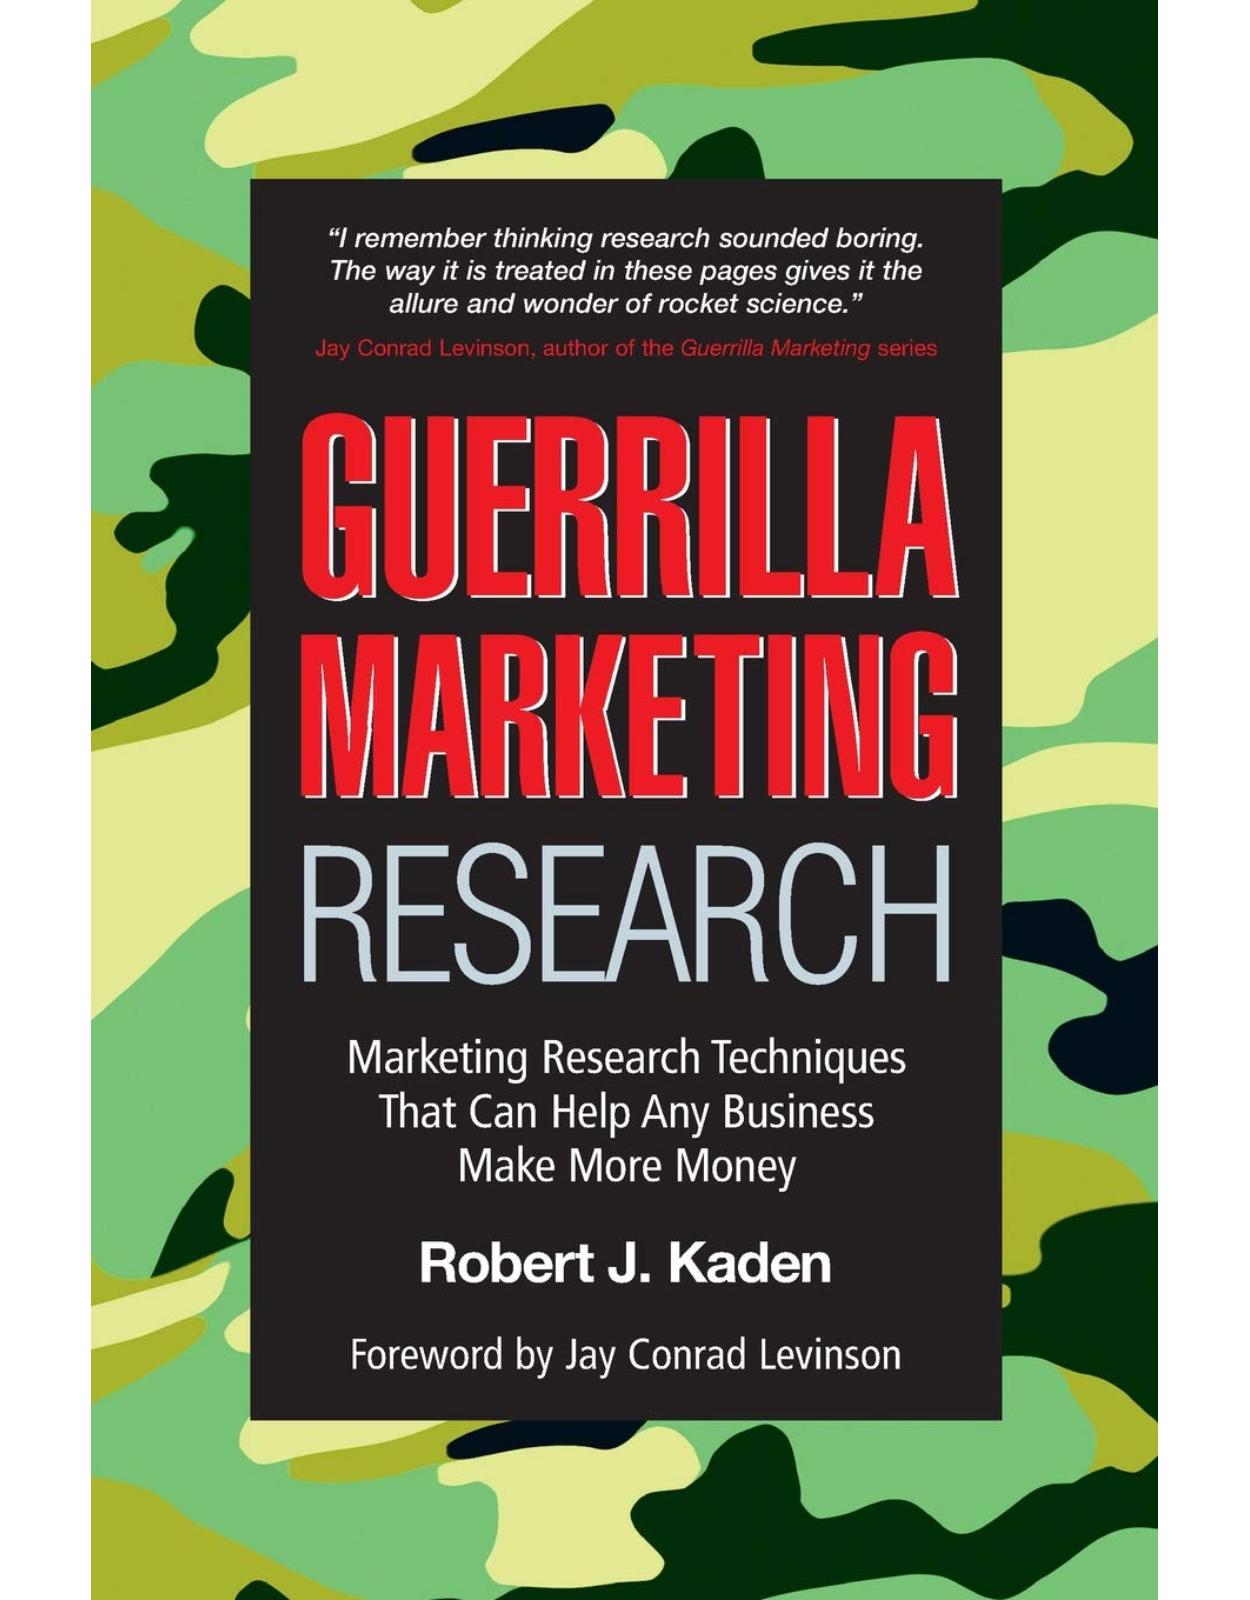 Guerrilla Marketing Research Marketing Research Techniques That Can Help AnyBusiness Make More Money